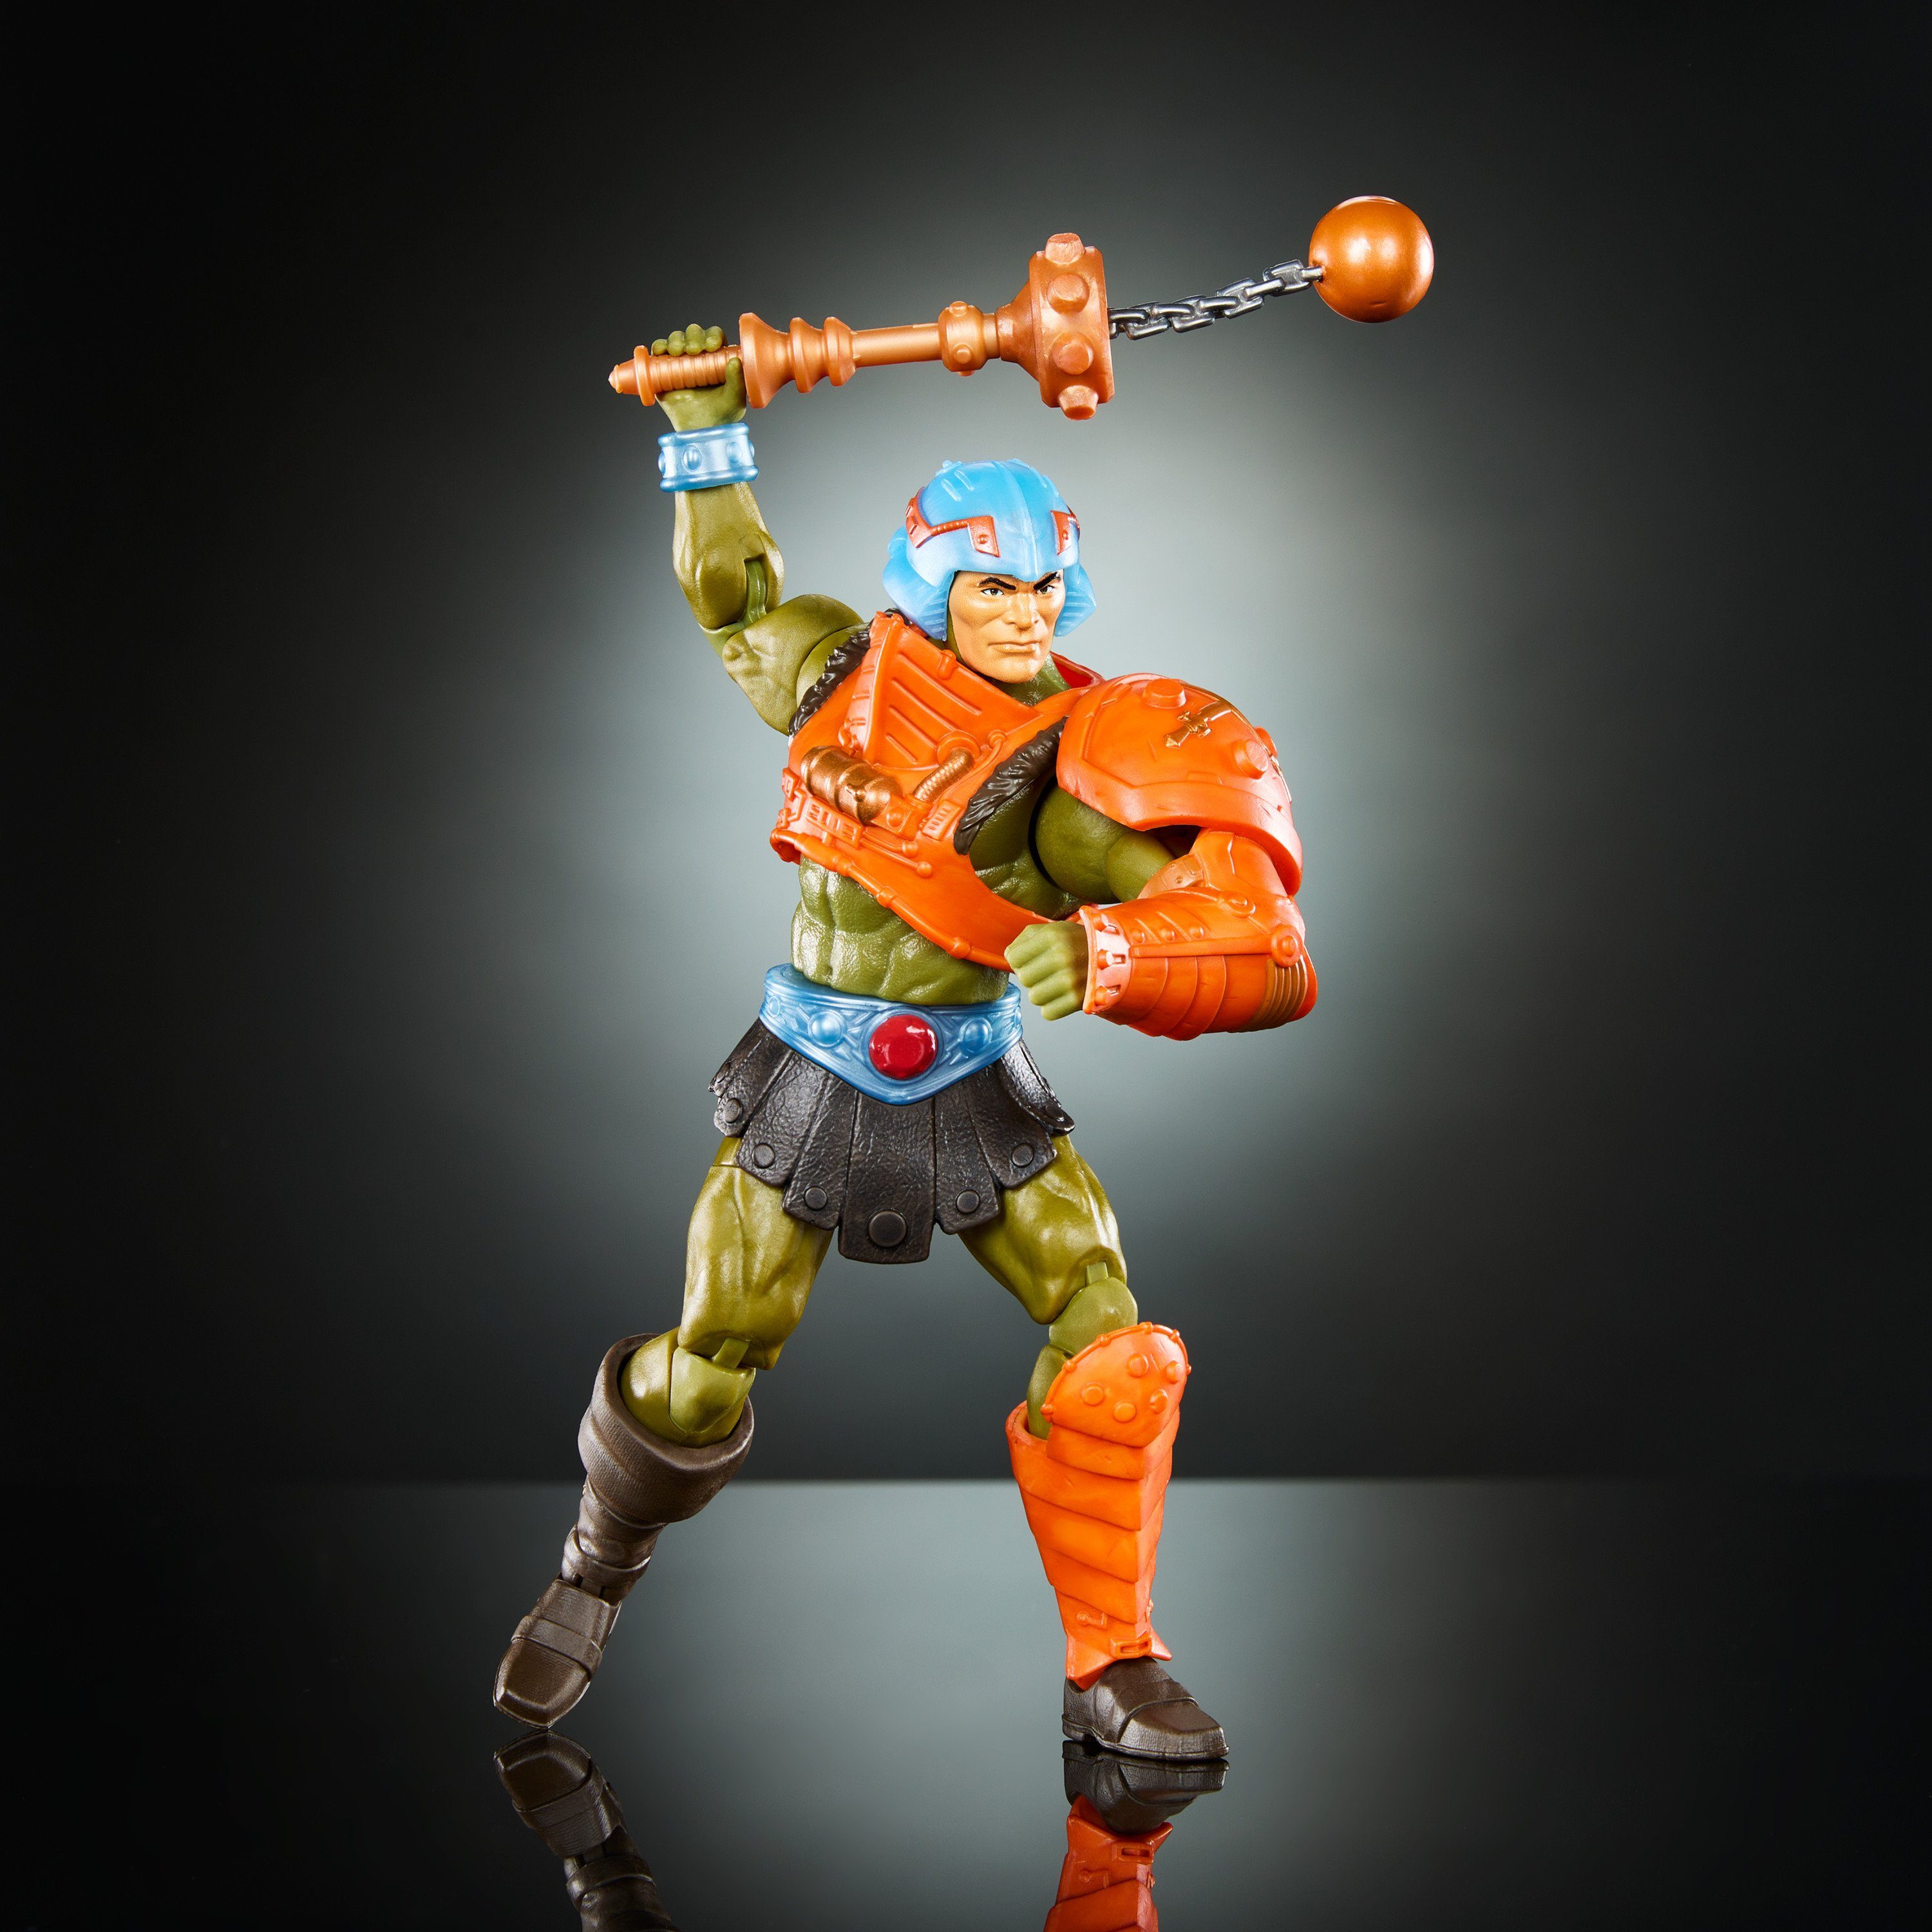 of Core Mattel® the Masters Man-At-Arms Masterverse HYC48 Actionfigur NE Universe